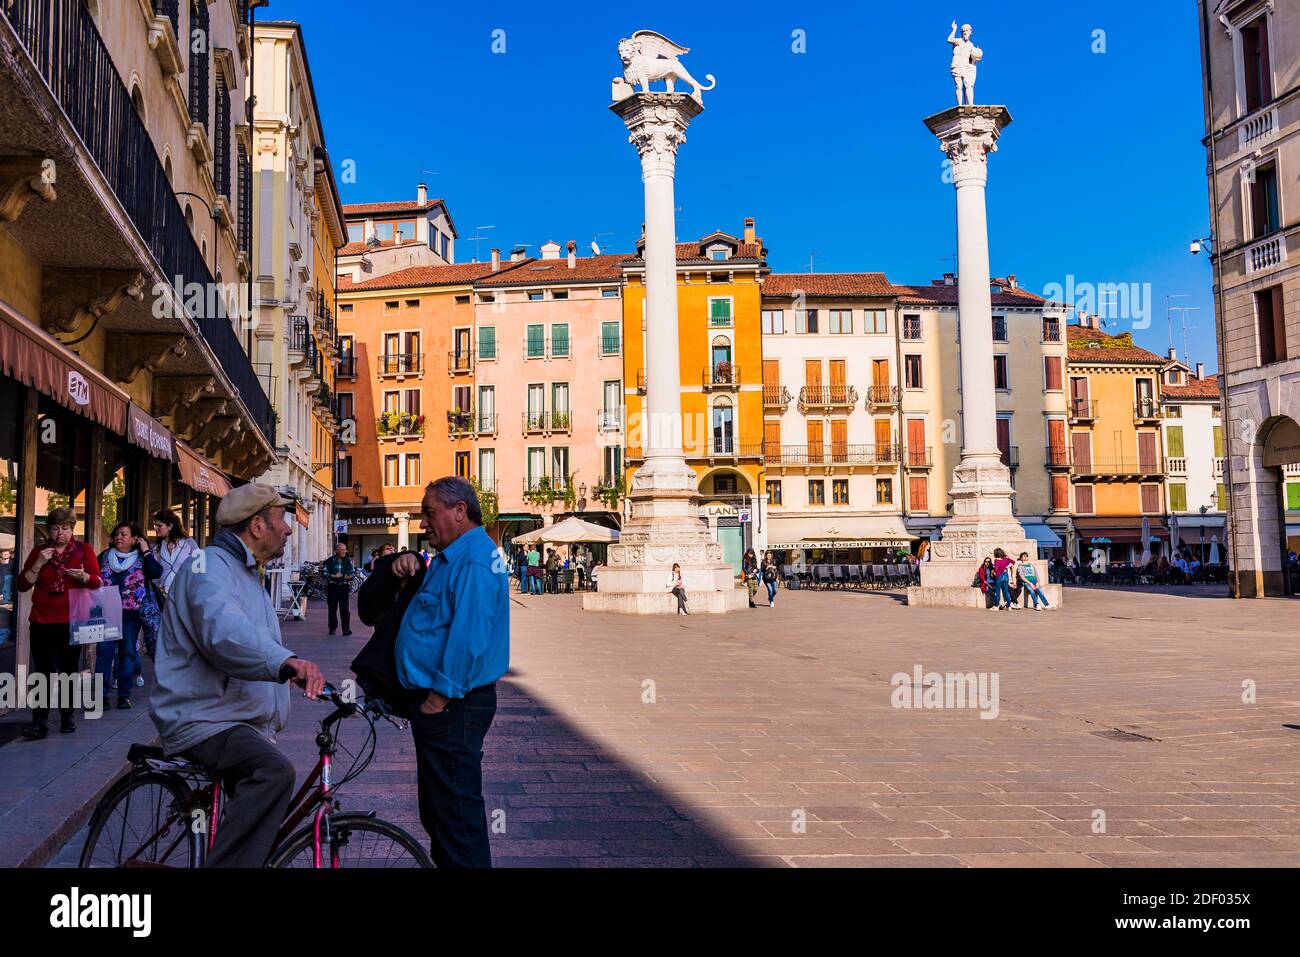 Piazza dei Signori, city square. The two columns, on the left the winged lion, symbol of Saint Mark and the Republic of Venice. Rigt, the redentore, C Stock Photo